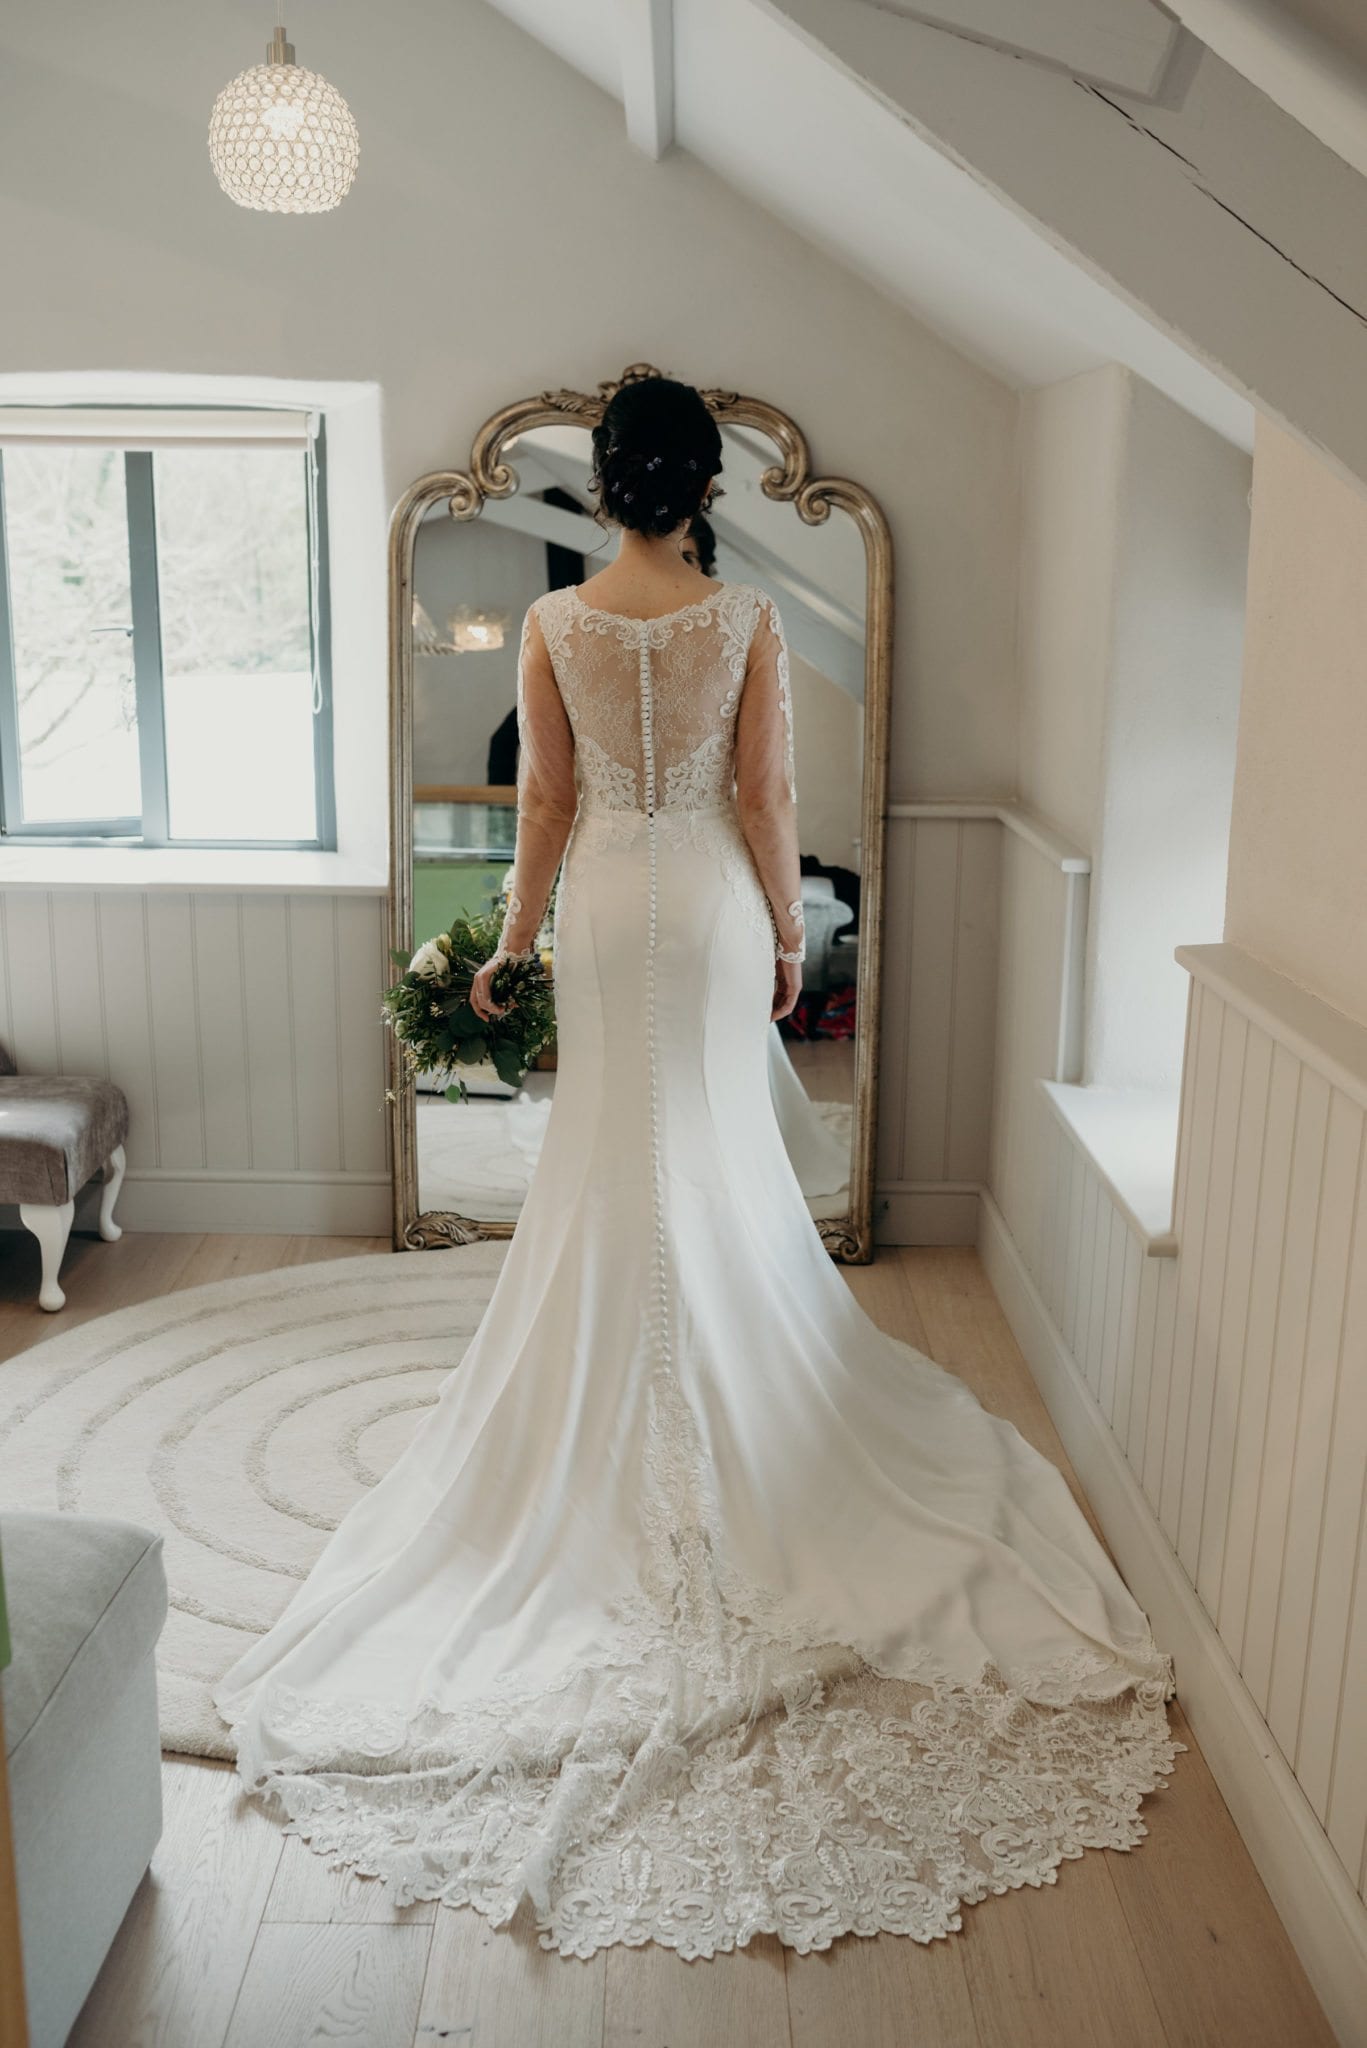 bride standing in mirror with bouquet to her left. in focus is her mirage image; lace dress with long sleeves, v neck, and a plan skirt. Slightly out of focus is the back view of the dress with illusion lace and buttons.